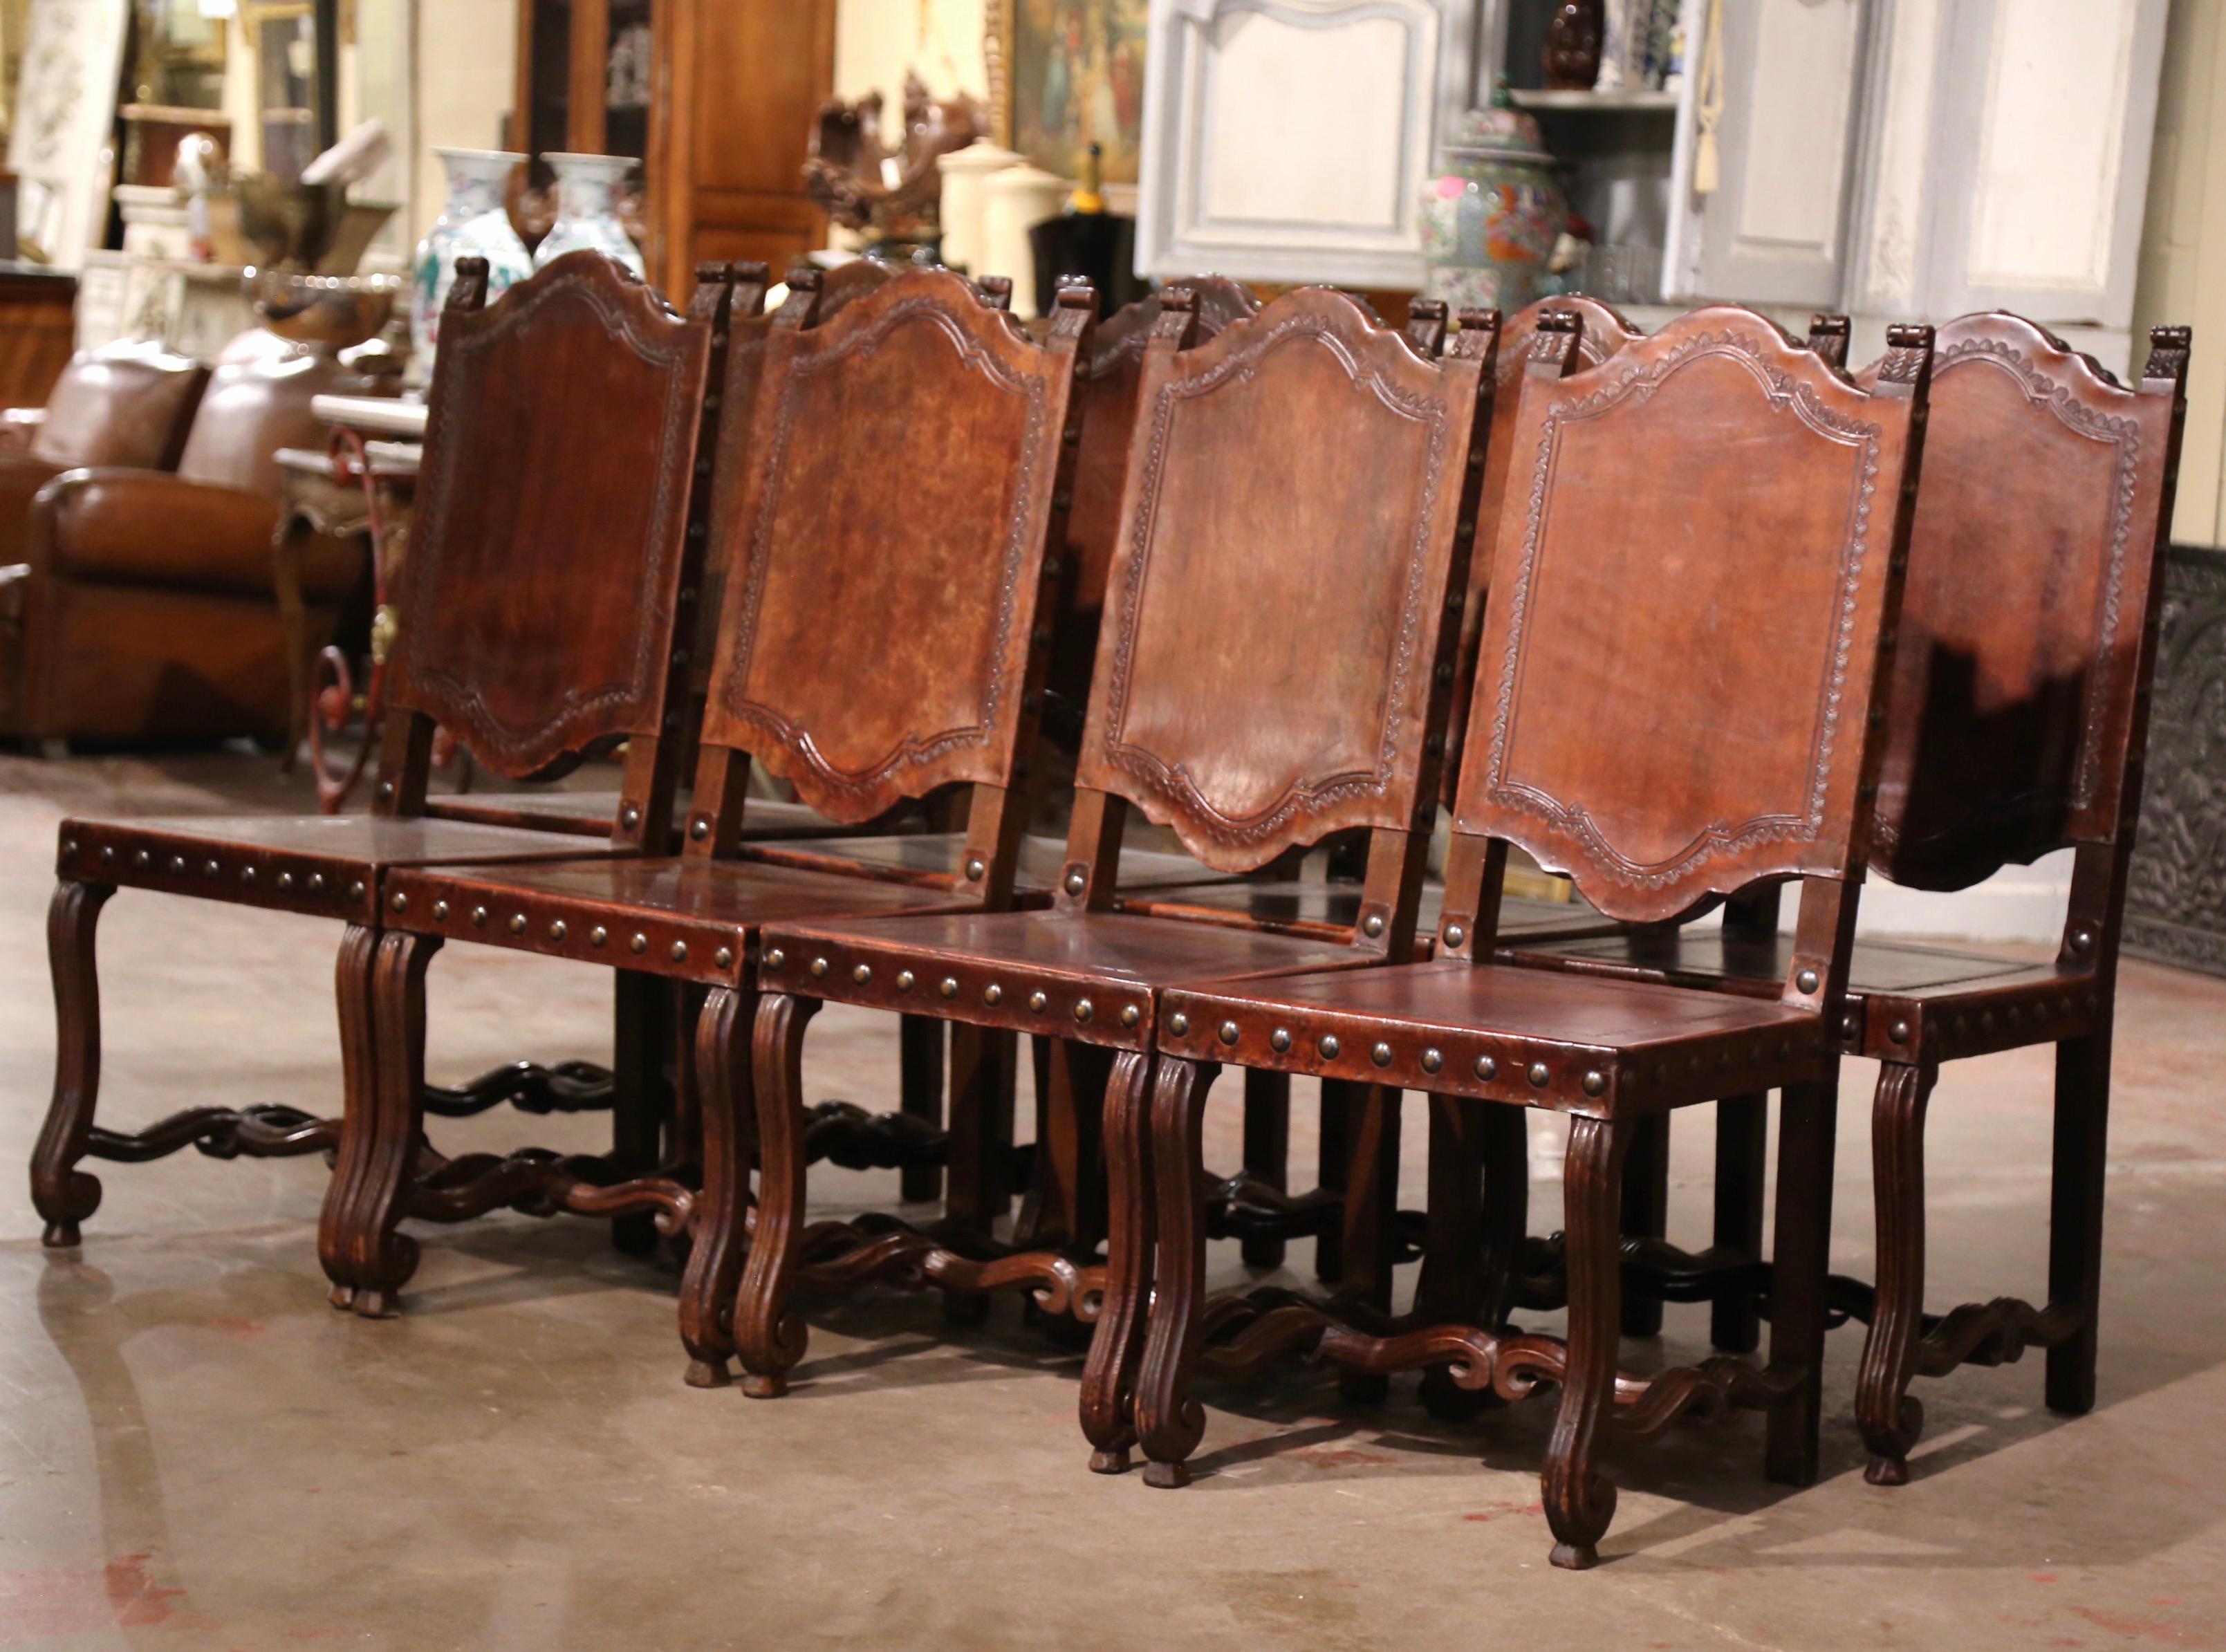 Dress a dining or breakfast table with this elegant suite of antique chairs. Crafted in Spain circa 1880, and built of walnut wood, each chair stands on carved and fluted legs ending with front scrolled legs; they are further decorated with a bottom